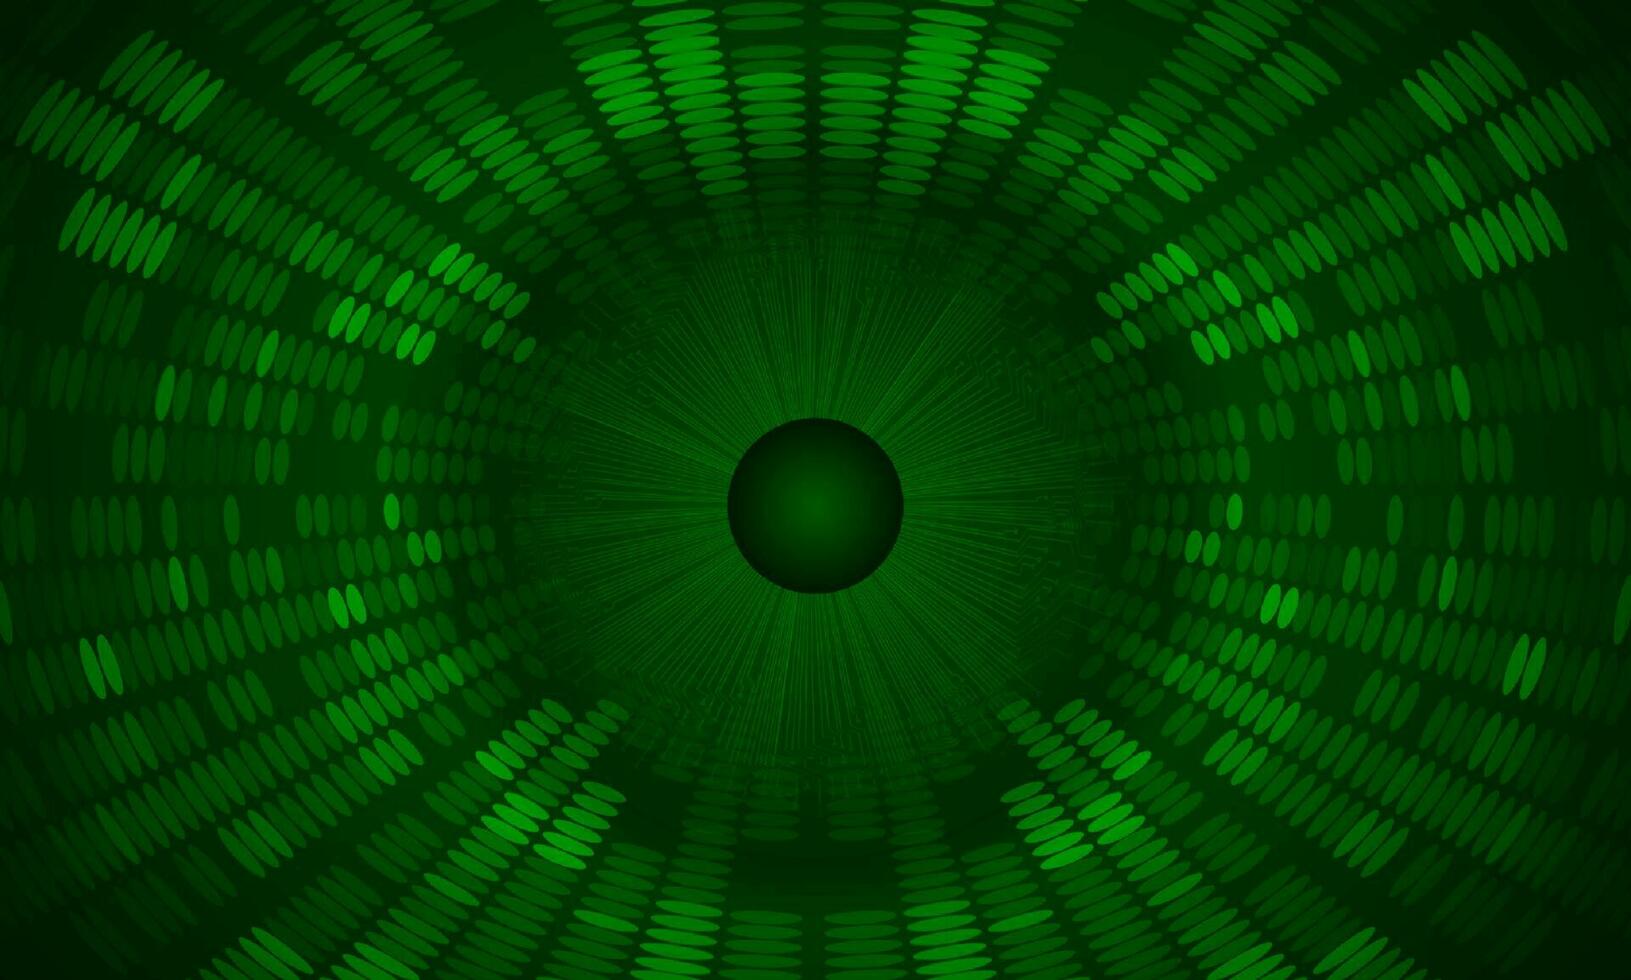 Modern Holographic Eye on Technology Background vector